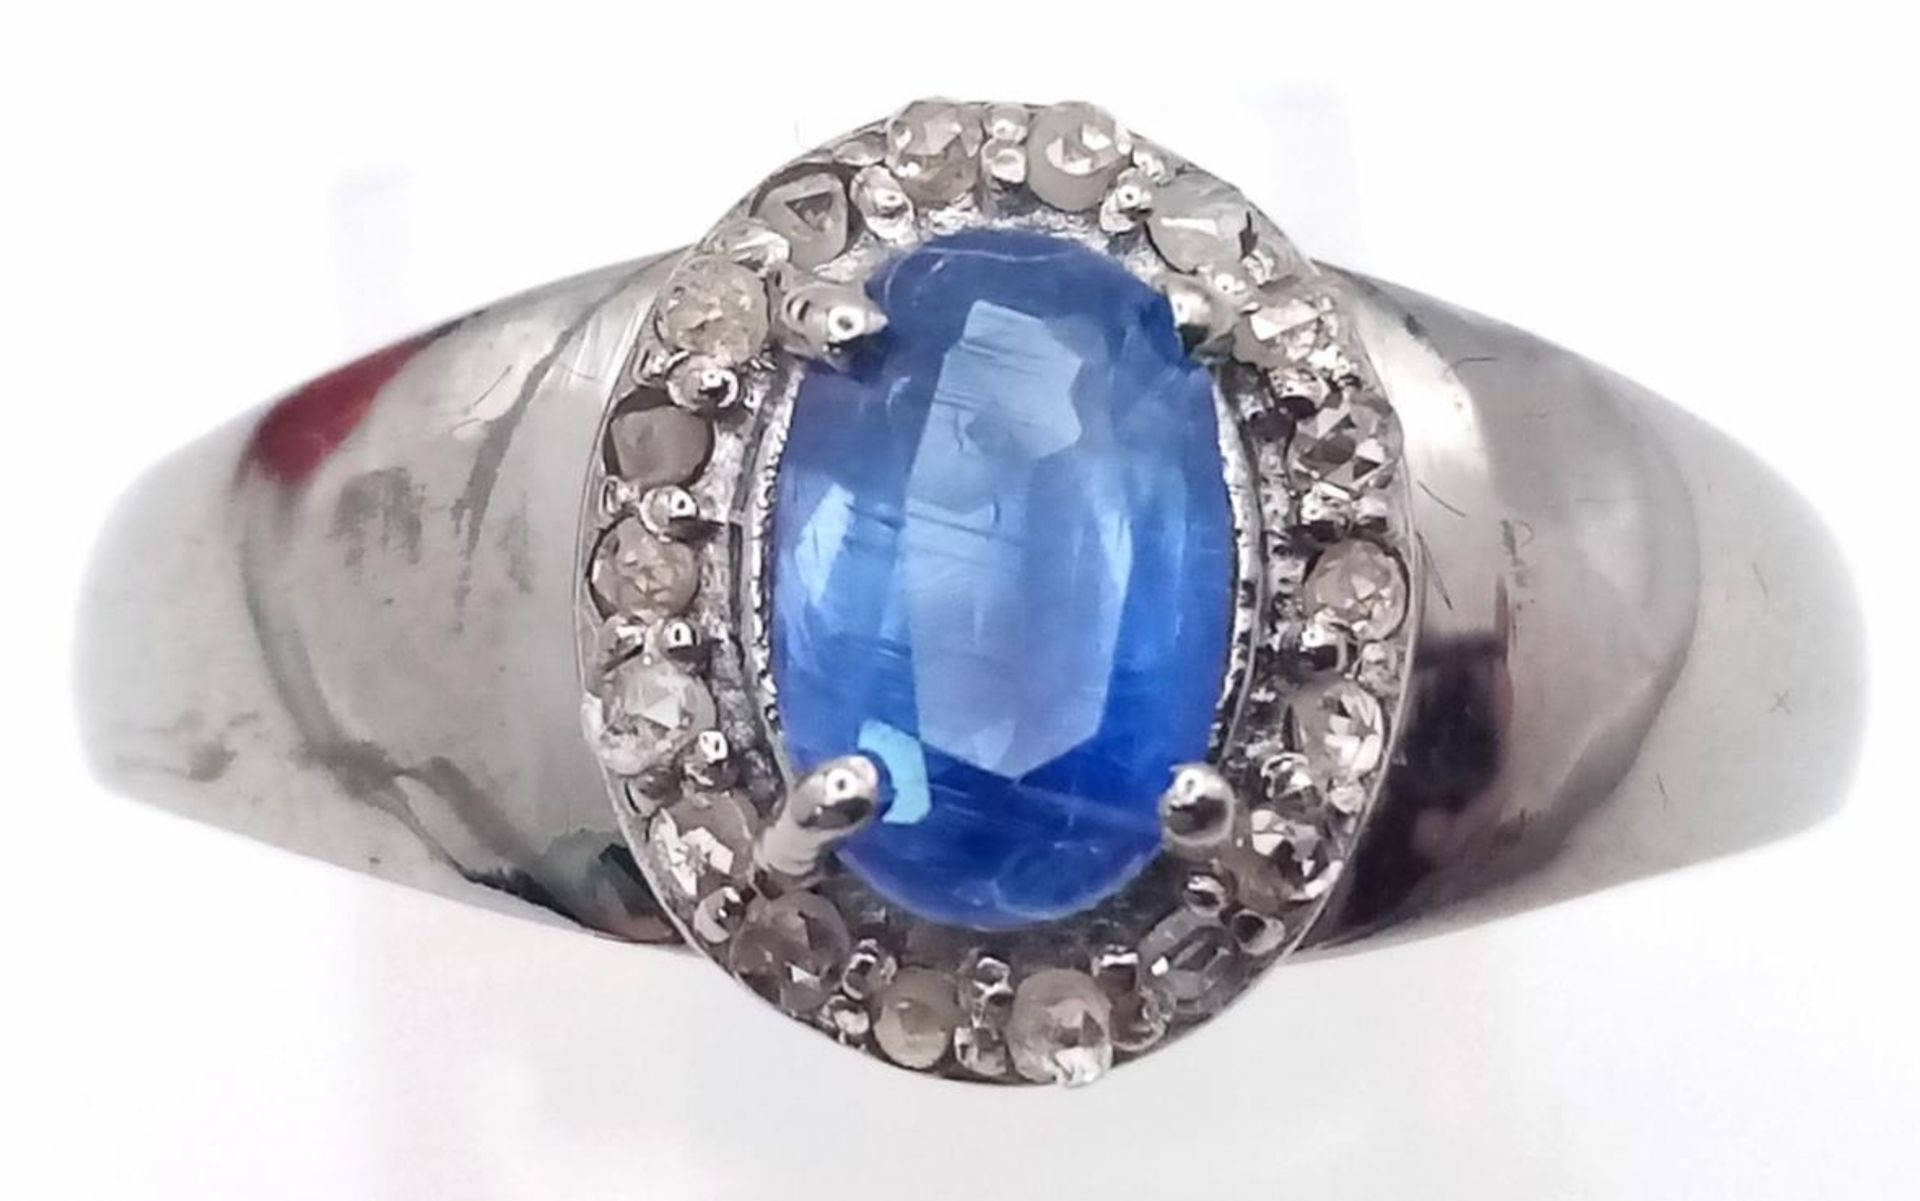 A Kyanite and Diamond Ring set in 925 Silver with a Black Rhodium Coating. Size O. Kyanite- 0.